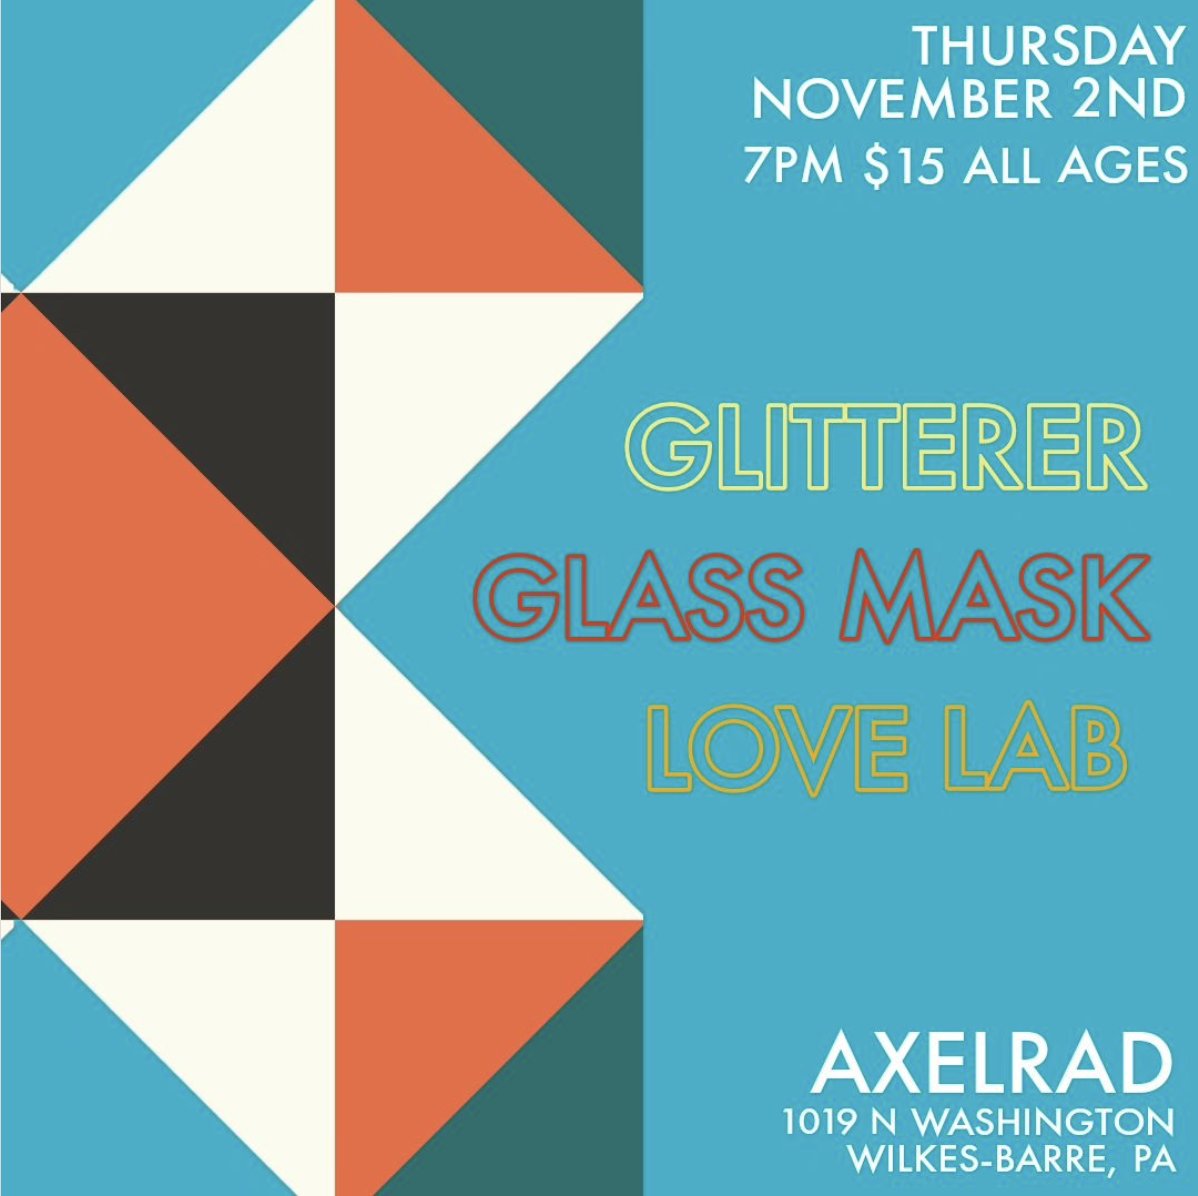 New show: November 2 at Axelrad in Wilkes-Barre, PA with Glass Mask and Love Lab